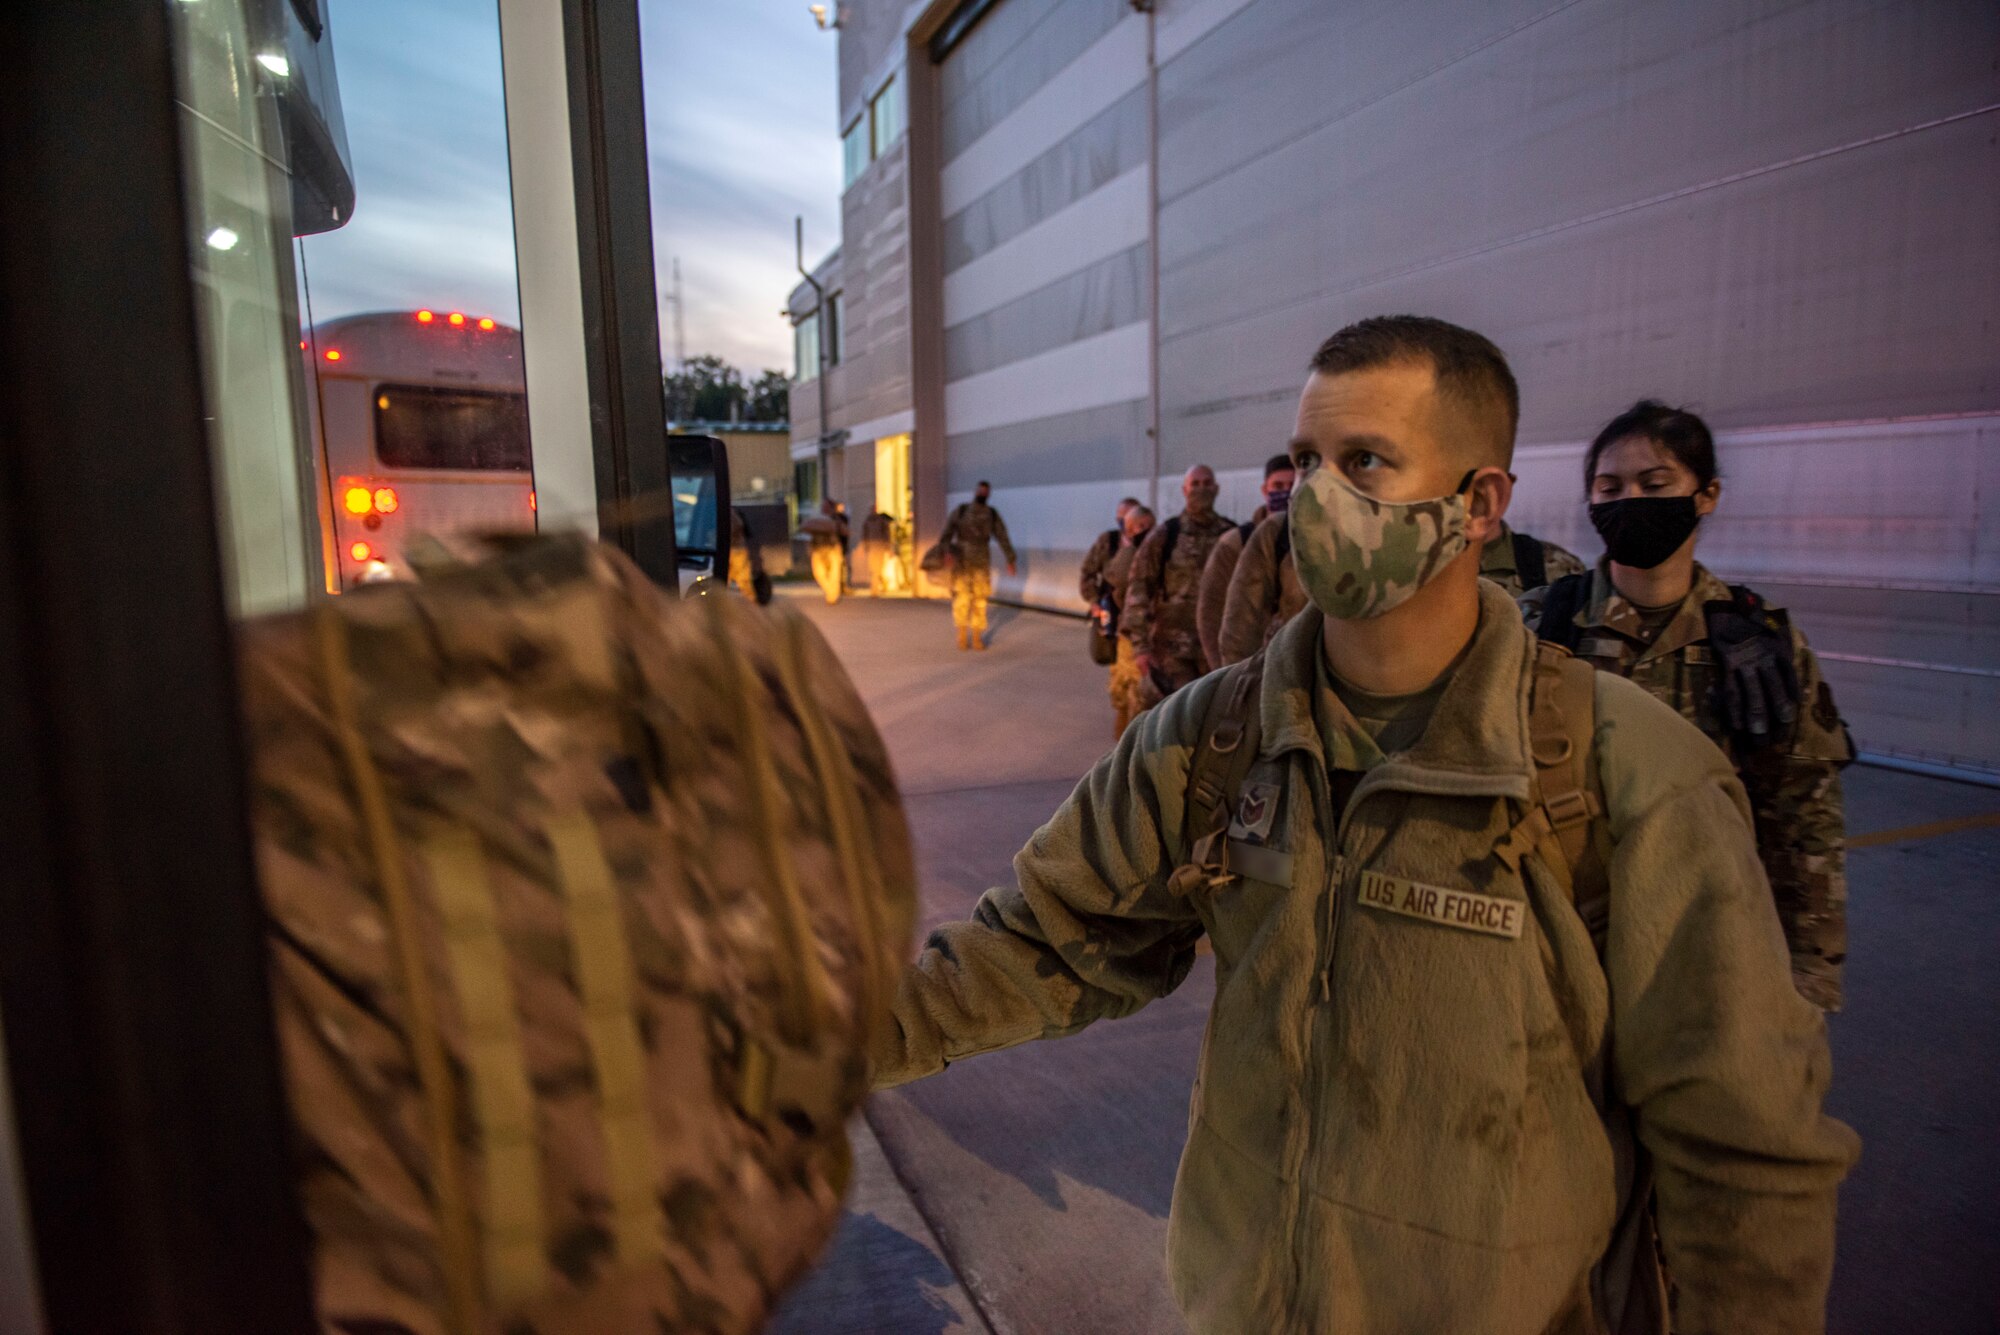 U.S. Airmen, assigned to the Ohio National Guard’s 180th Fighter Wing, board a bus at the 180FW in Swanton, Ohio, Oct. 3, 2020.